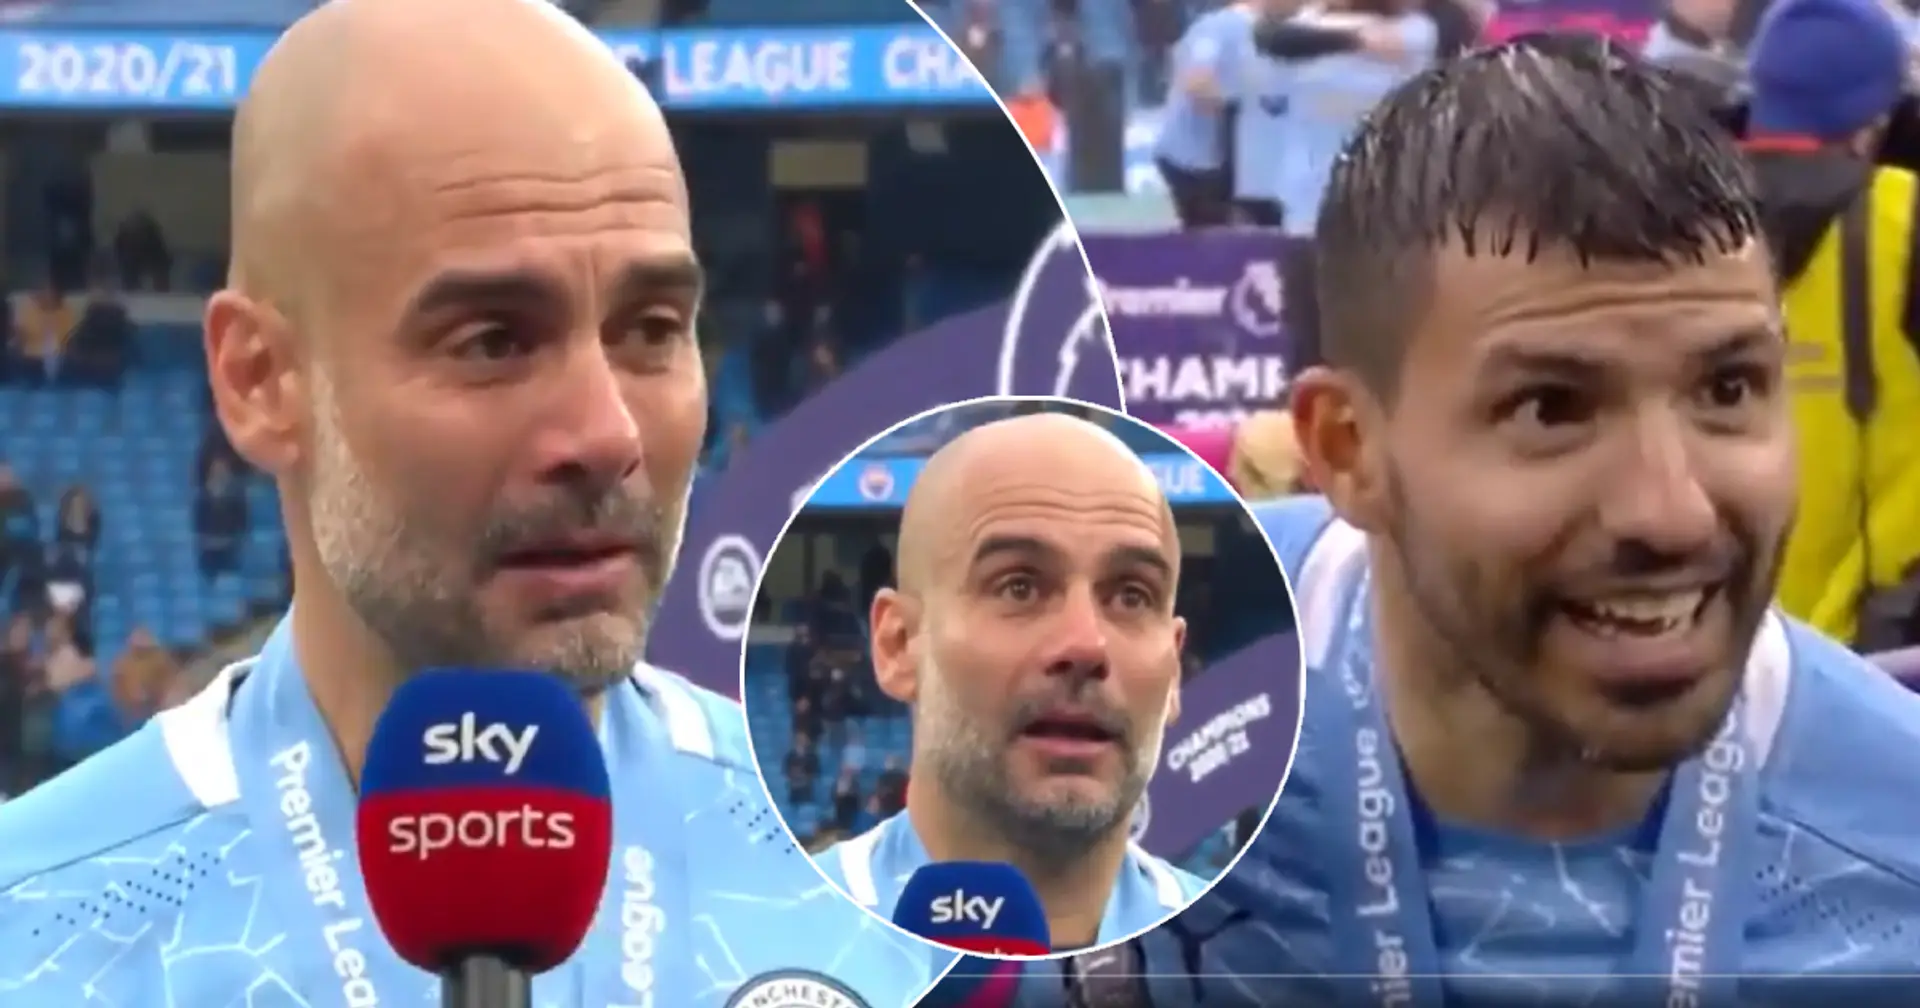 'We can't replace him': Pep Guardiola breaks down in tears discussing Aguero's exit